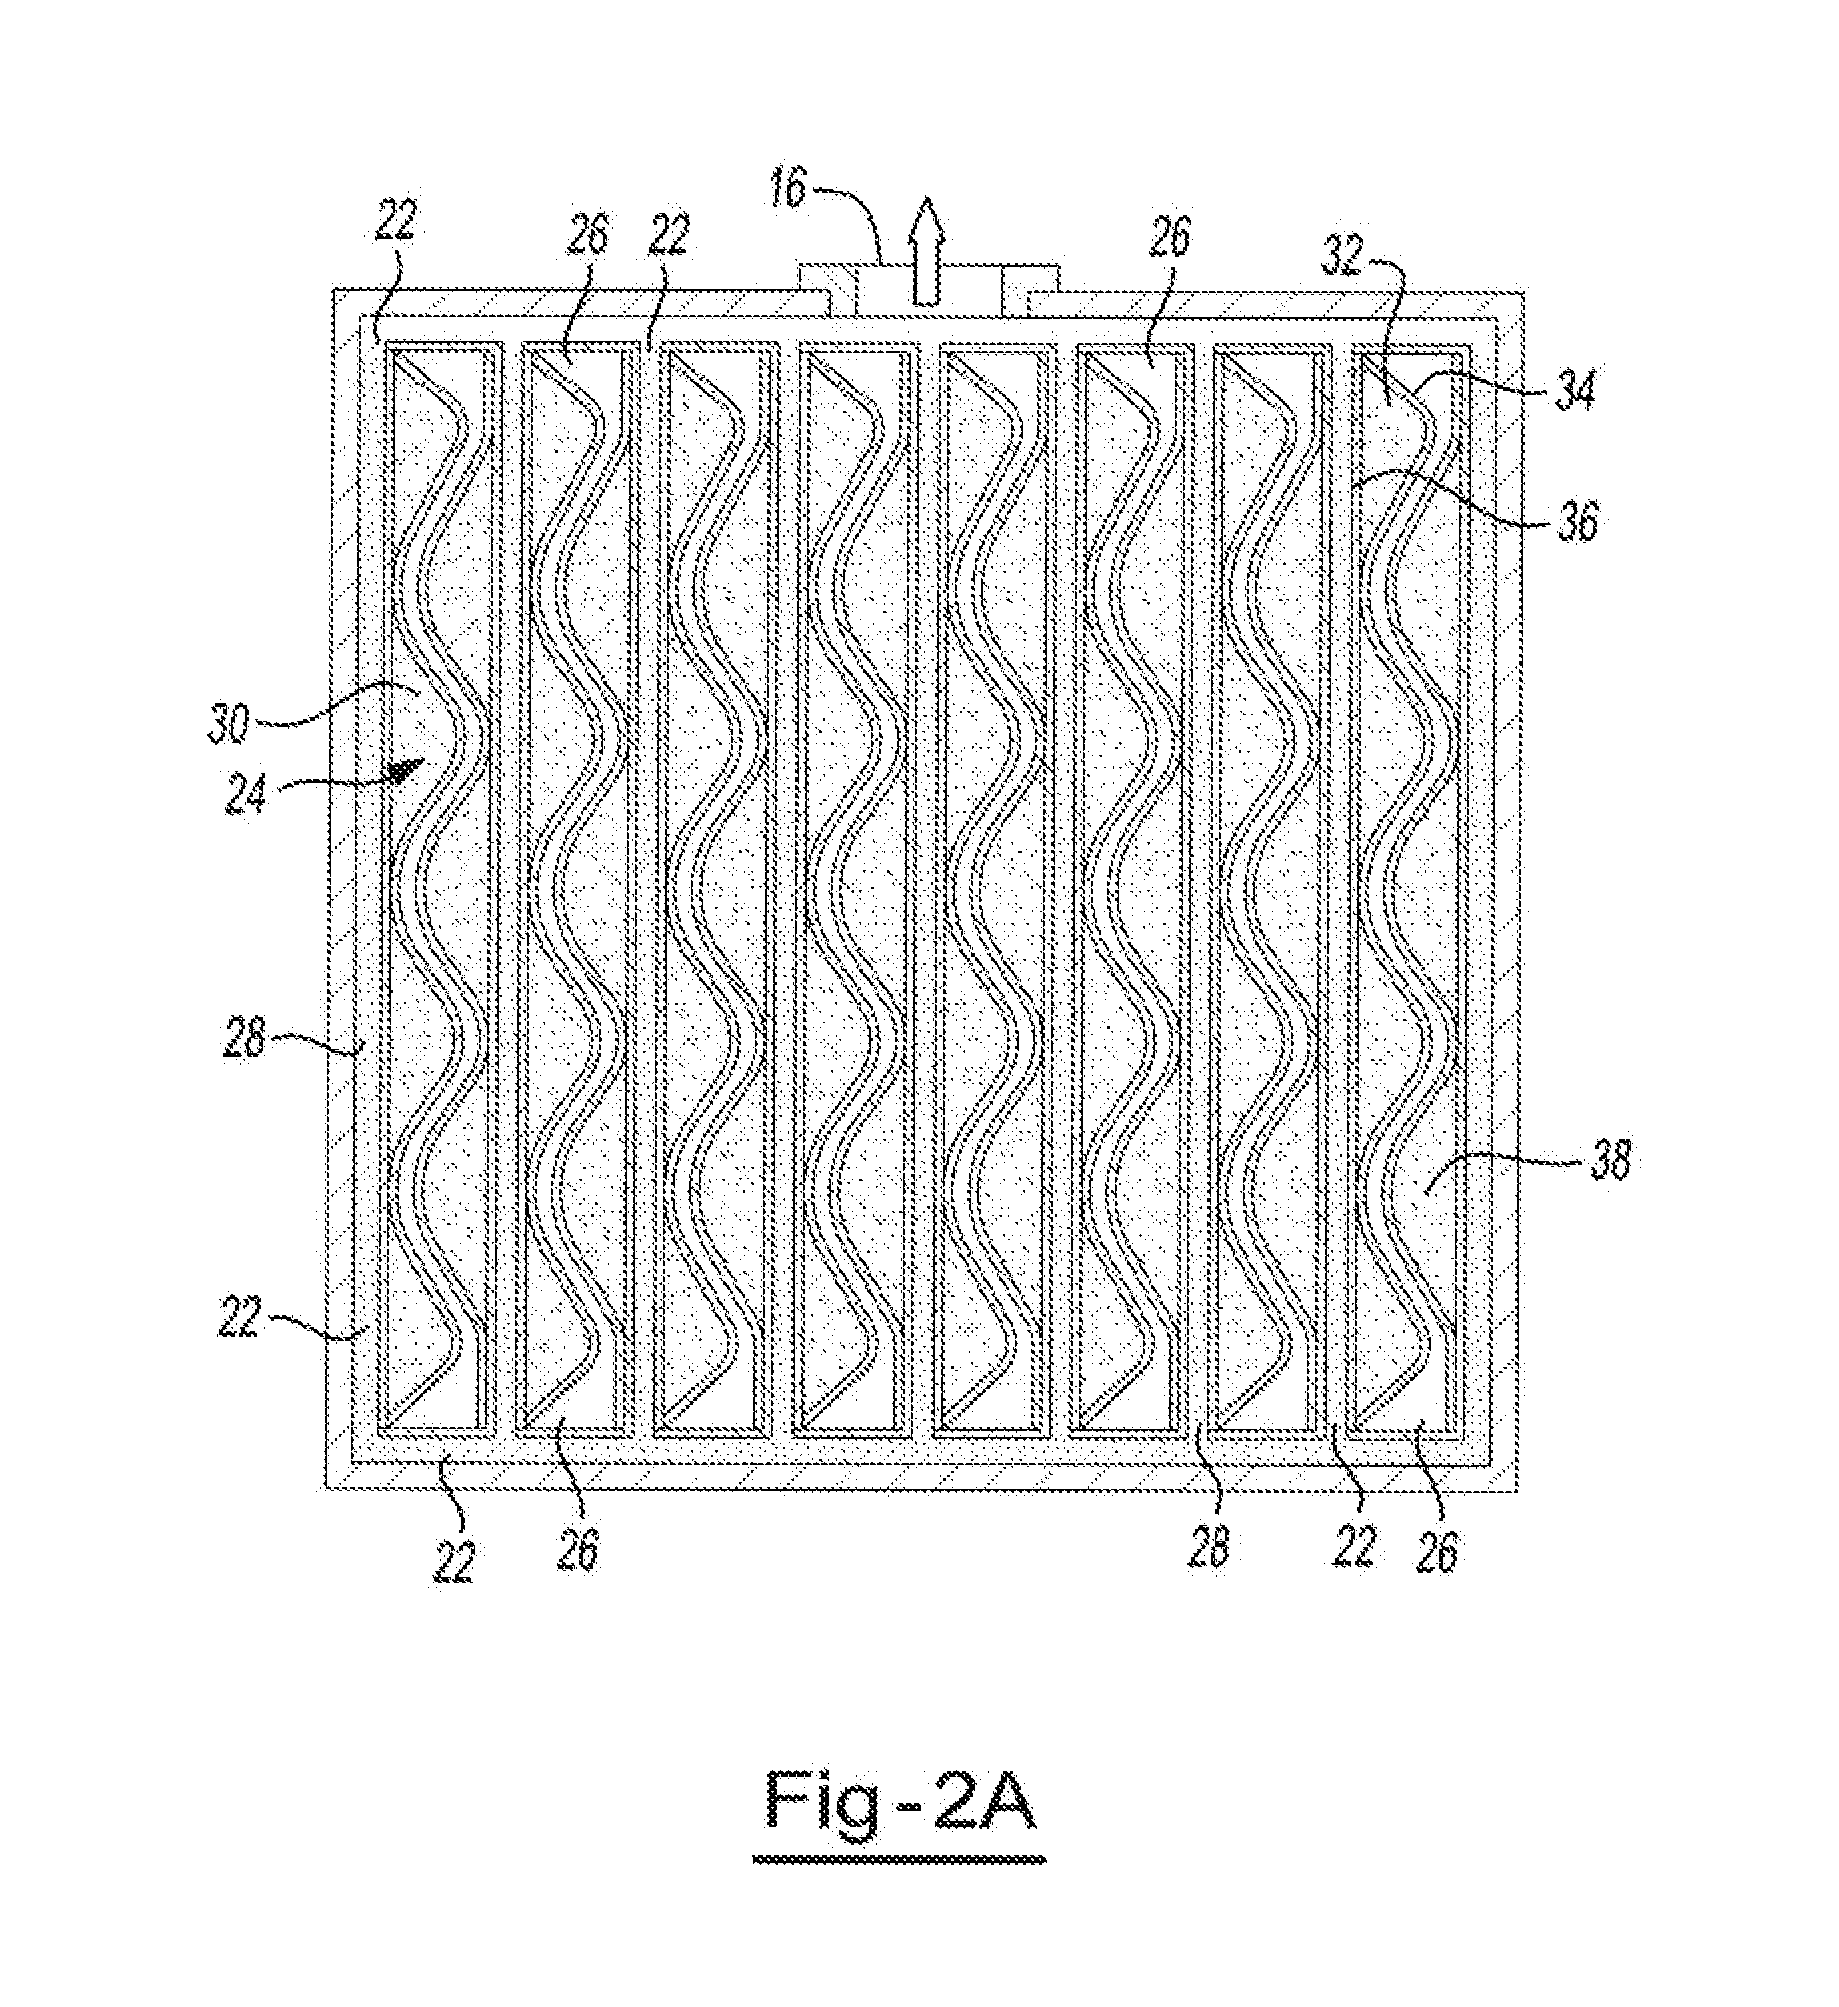 Heat transfer system utilizing thermal energy storage materials